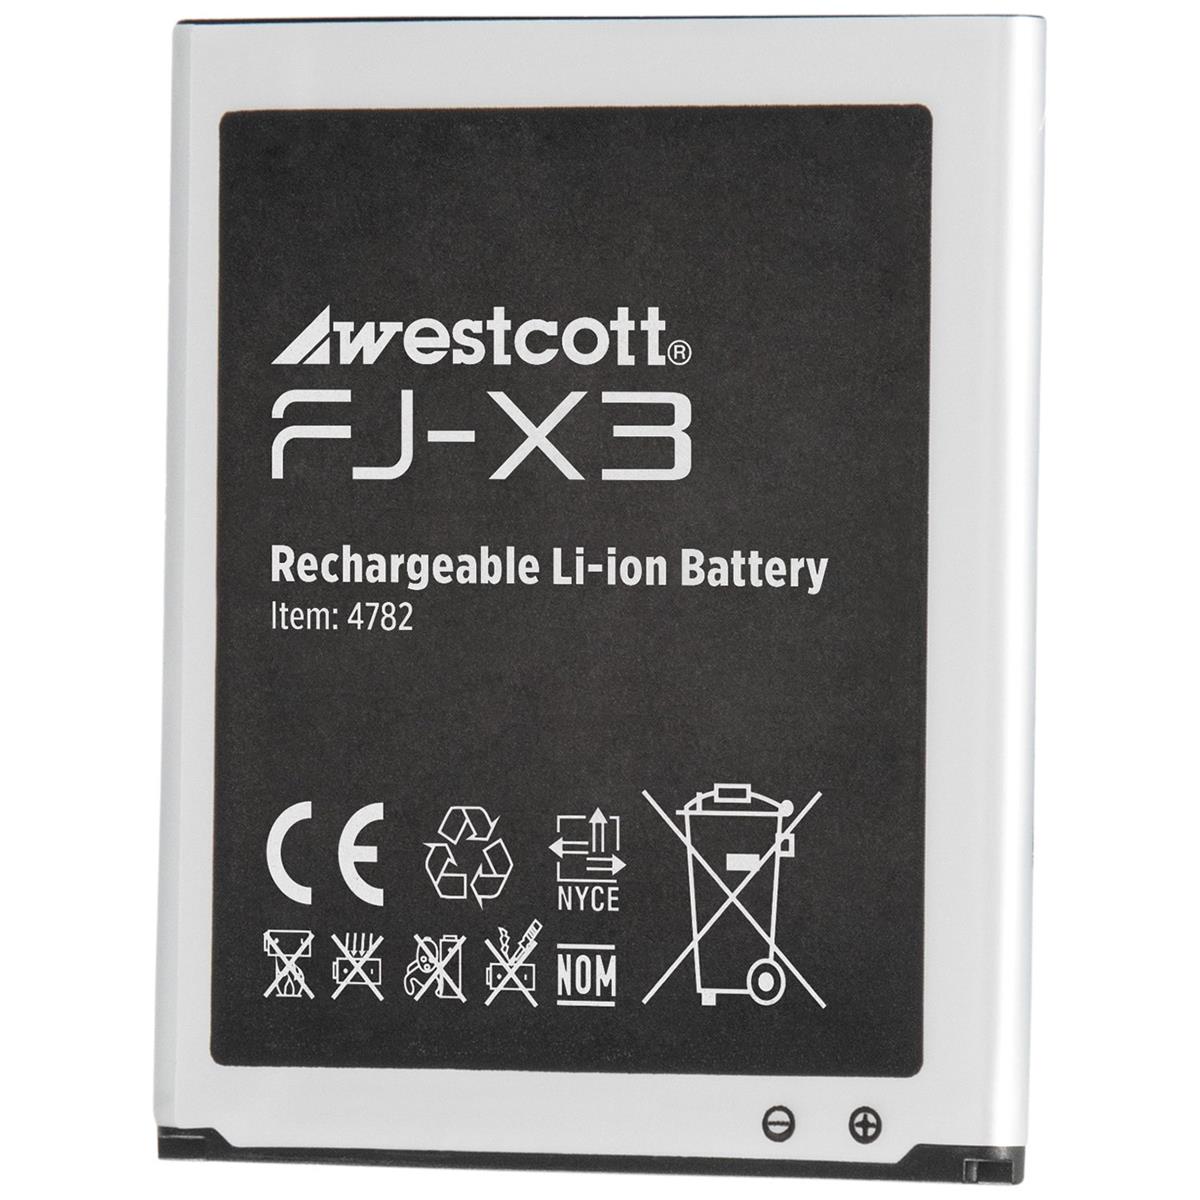 Image of Westcott 11Wh 3.8V 1500mAh DC Lithium-Ion Battery for FJ-X3 Flash Trigger